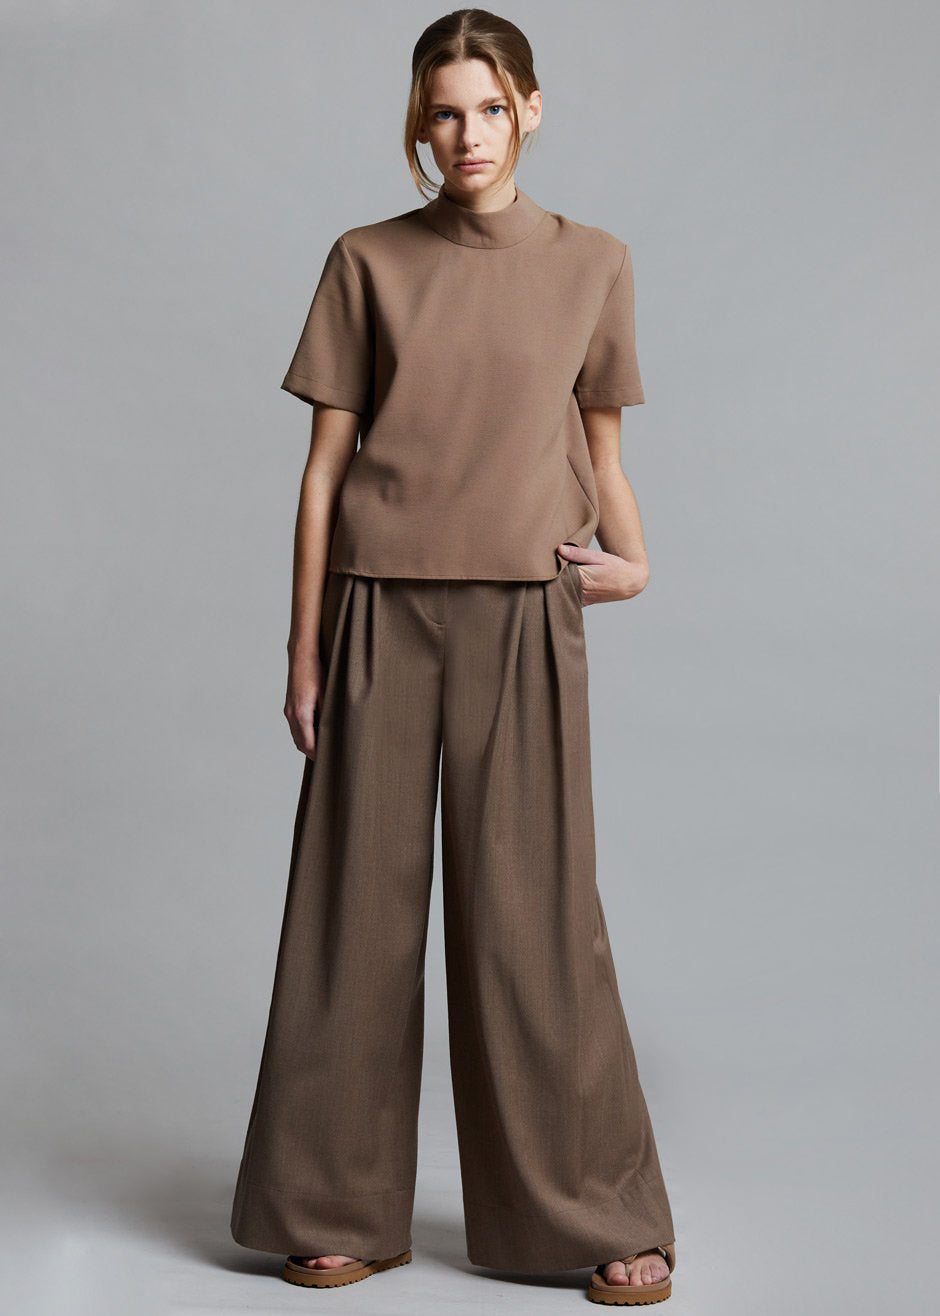 Equus Pants by The Garment in Taupe - 1